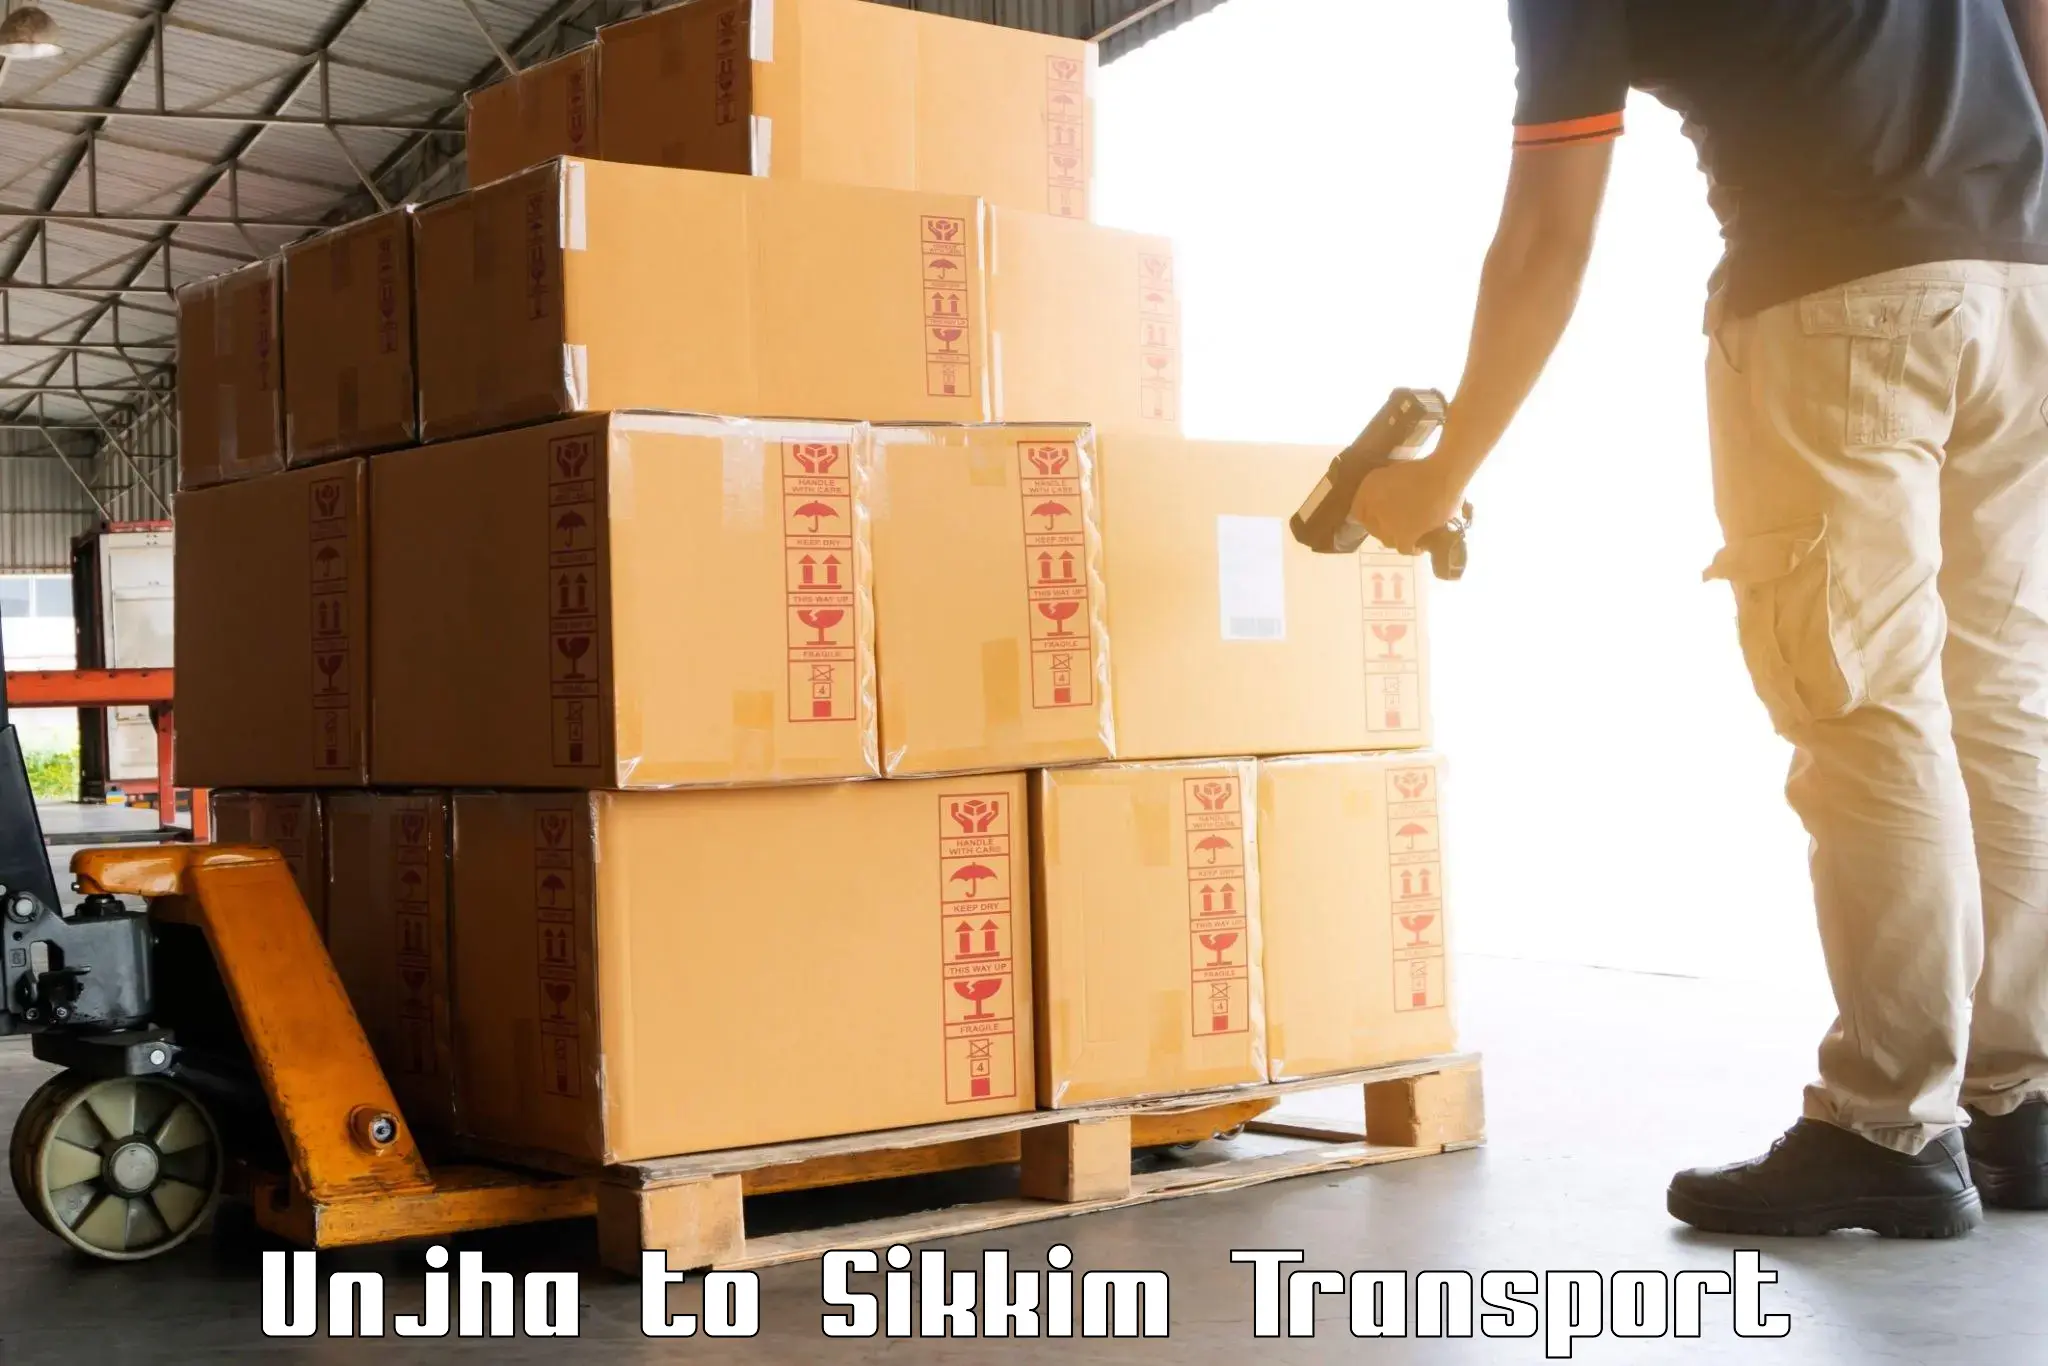 Transport in sharing Unjha to Sikkim